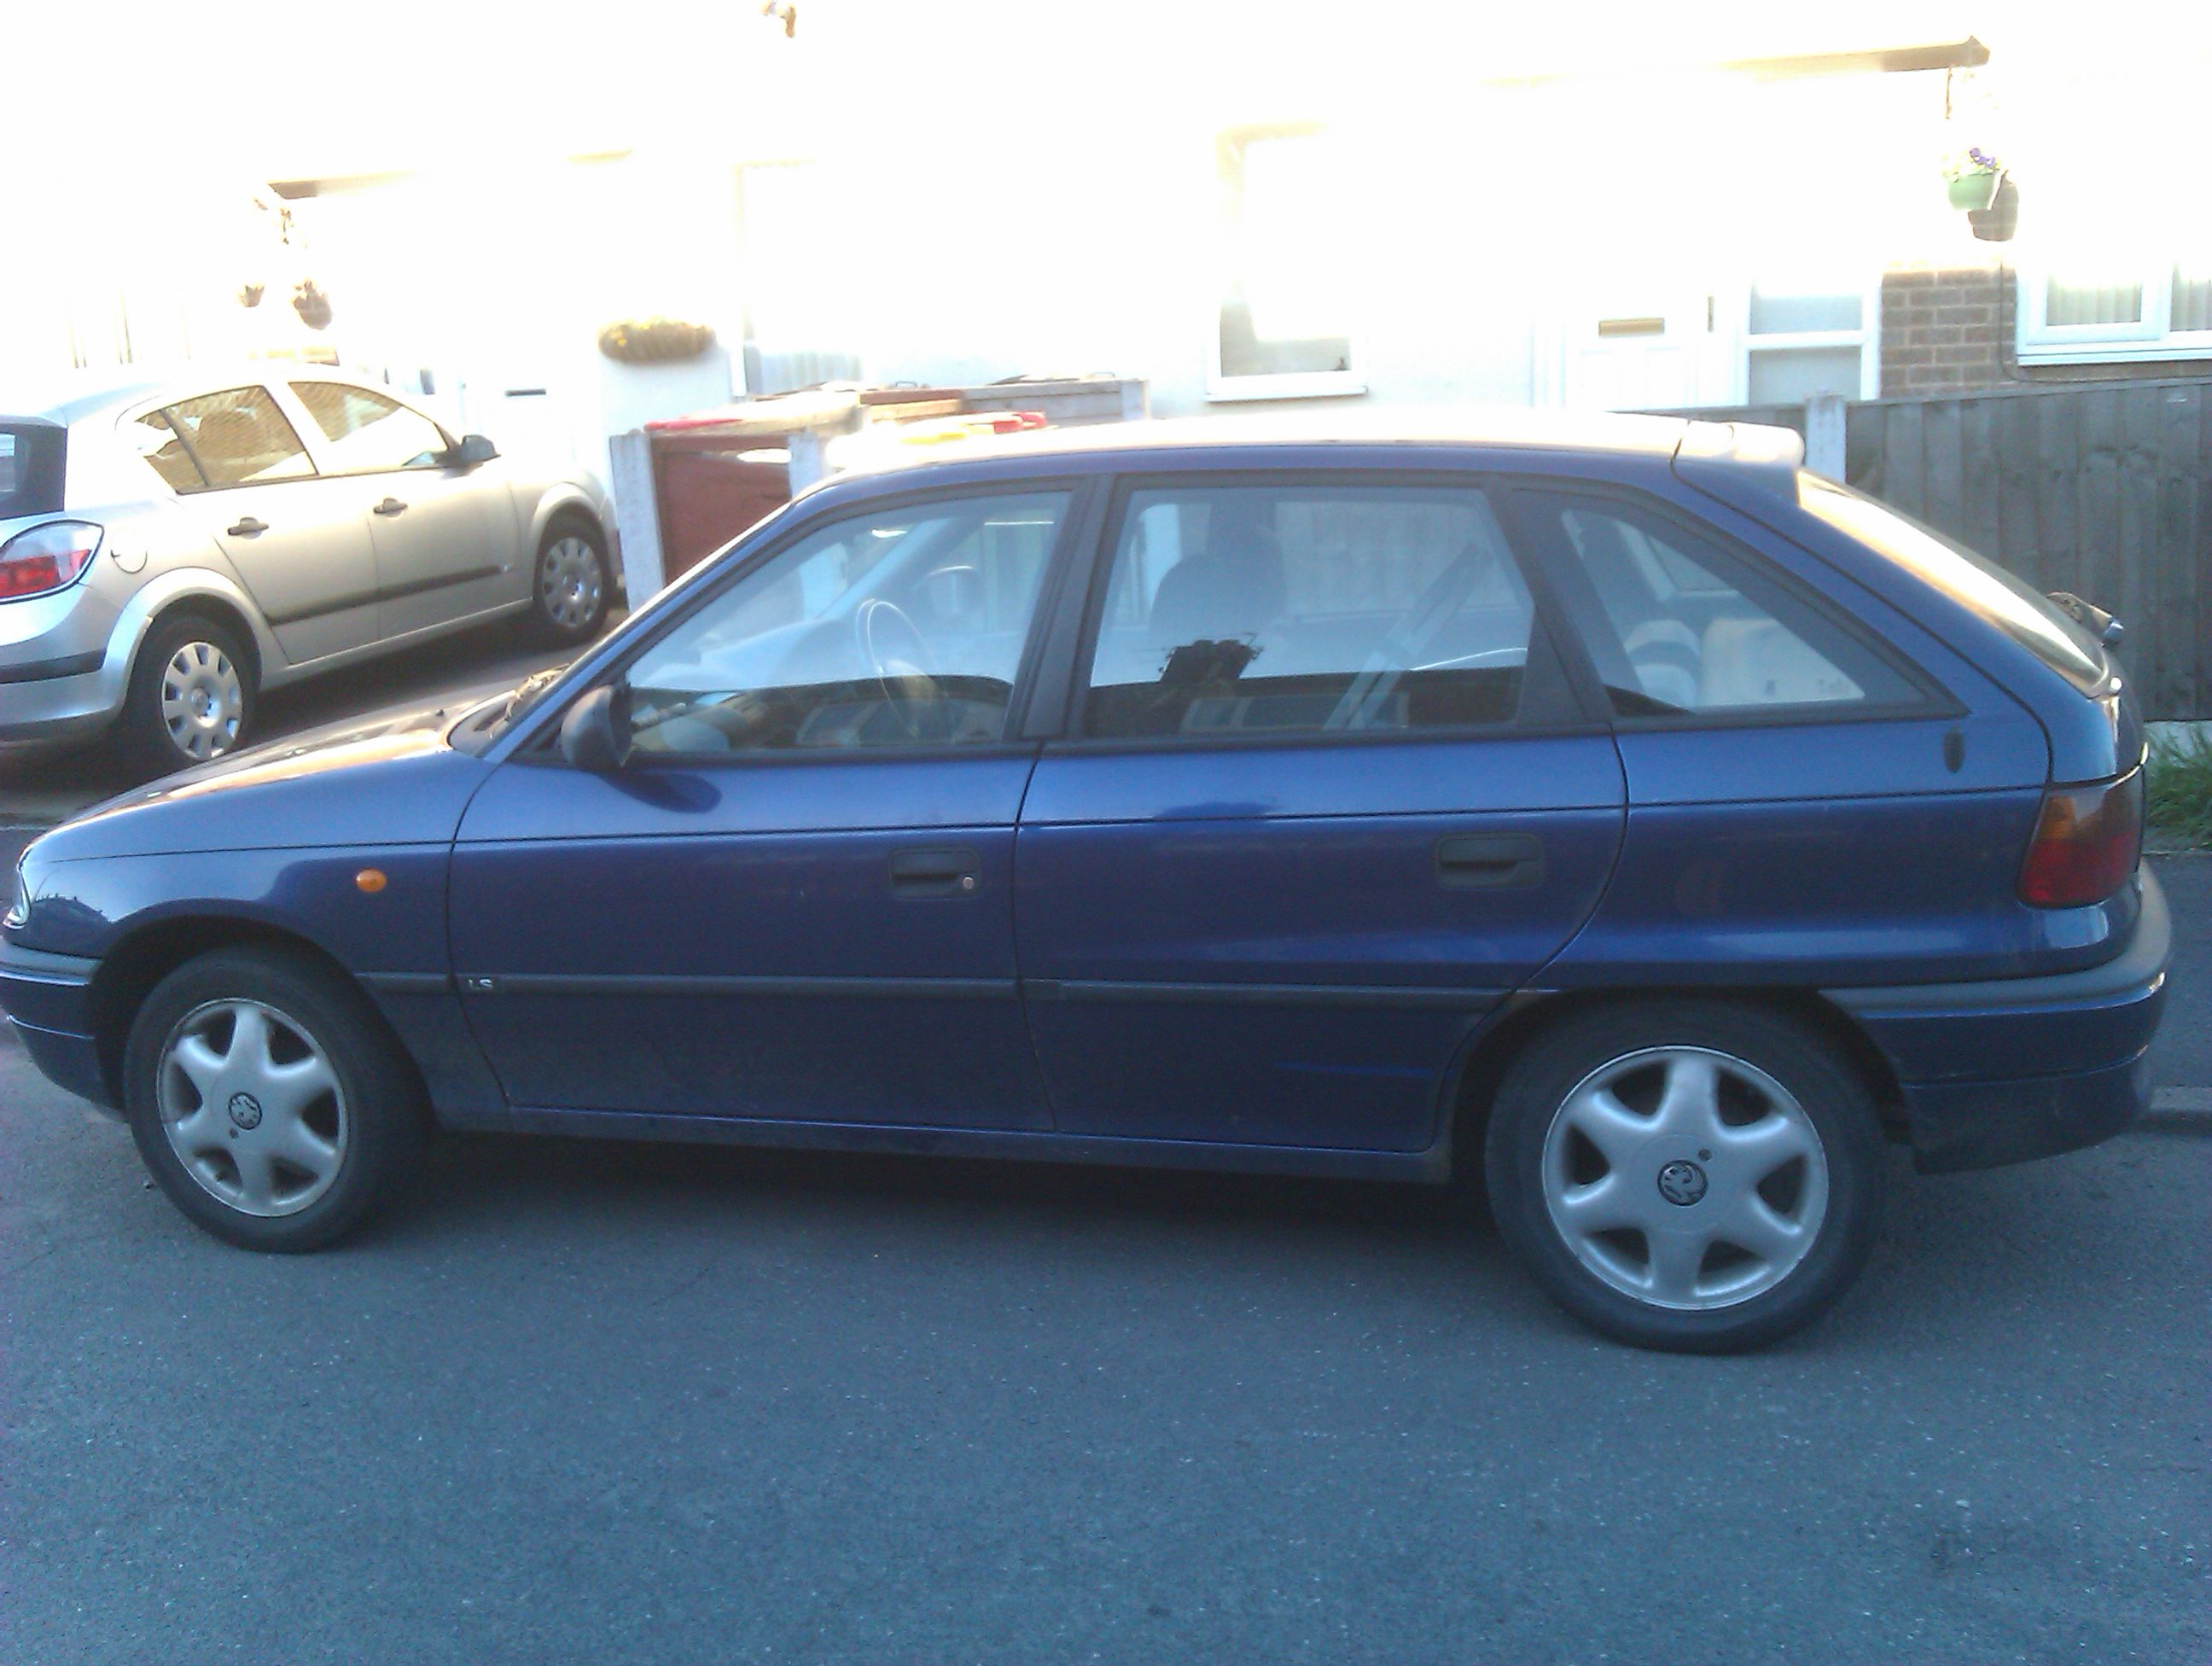 Vauxhall Astra 1.4, 1997, 77,000 miles, MOT July 2015, good runner, used daily